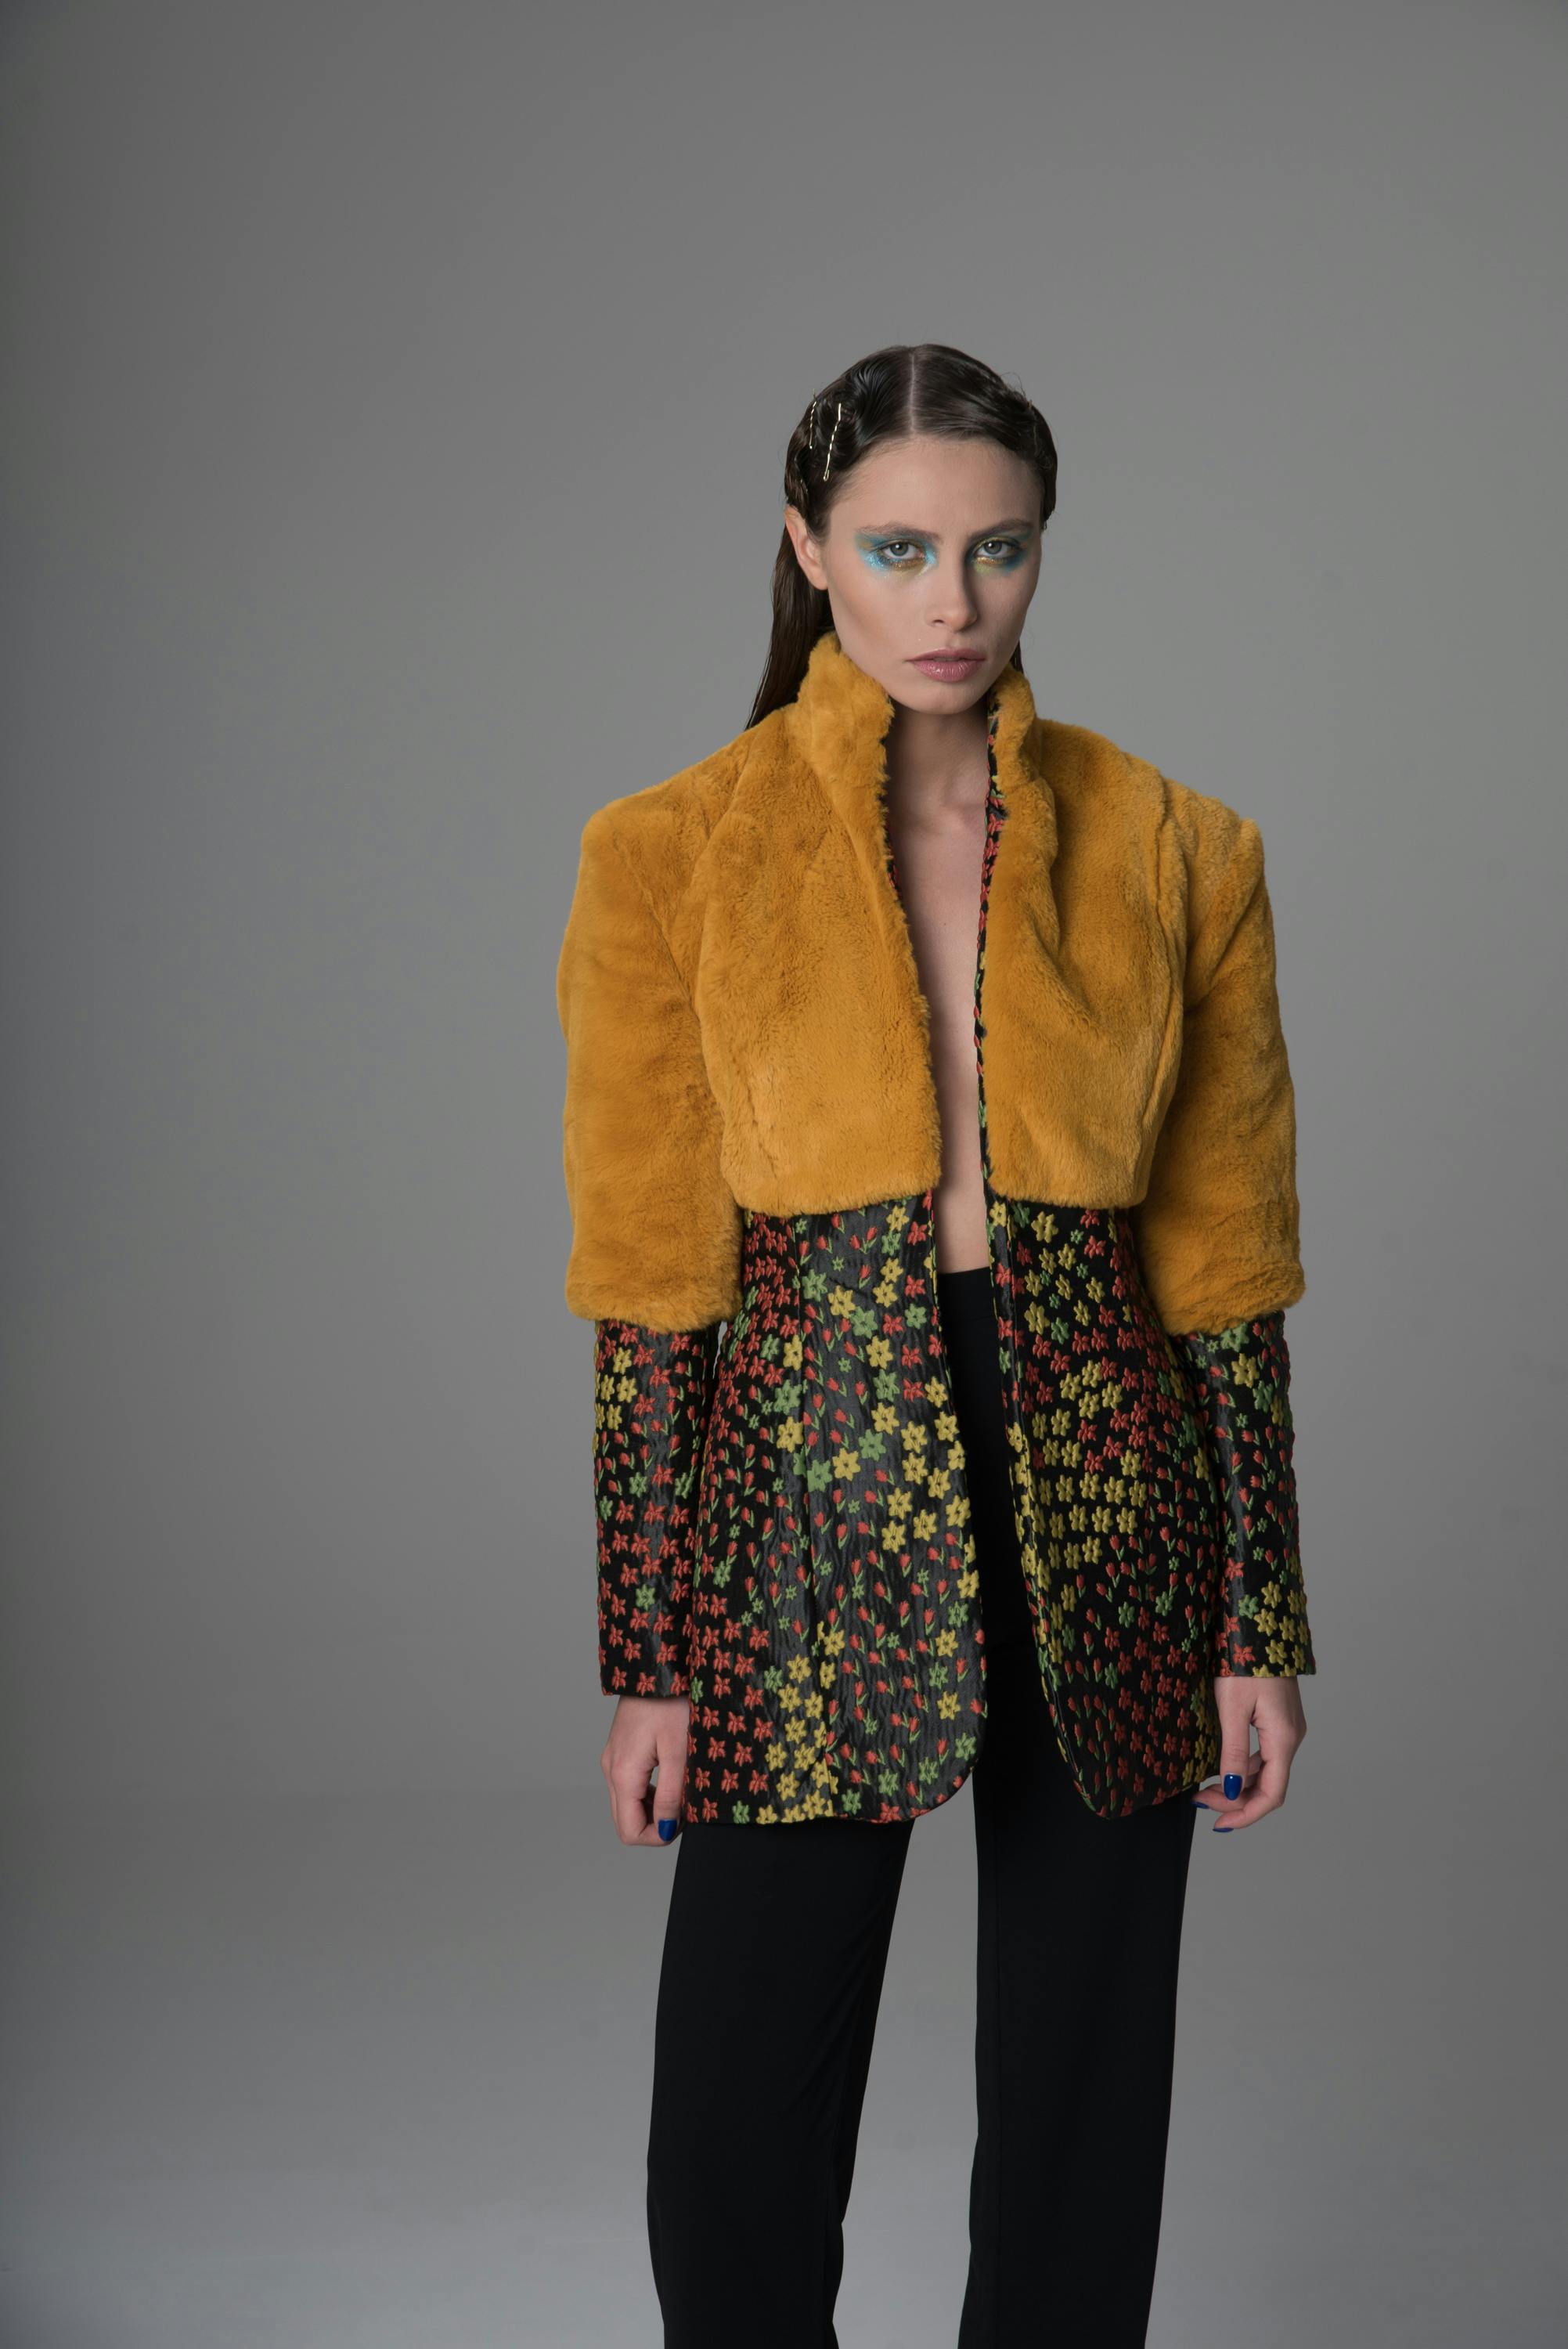 FUR FLOWER JACKET, a product by Psychedelic Overdose